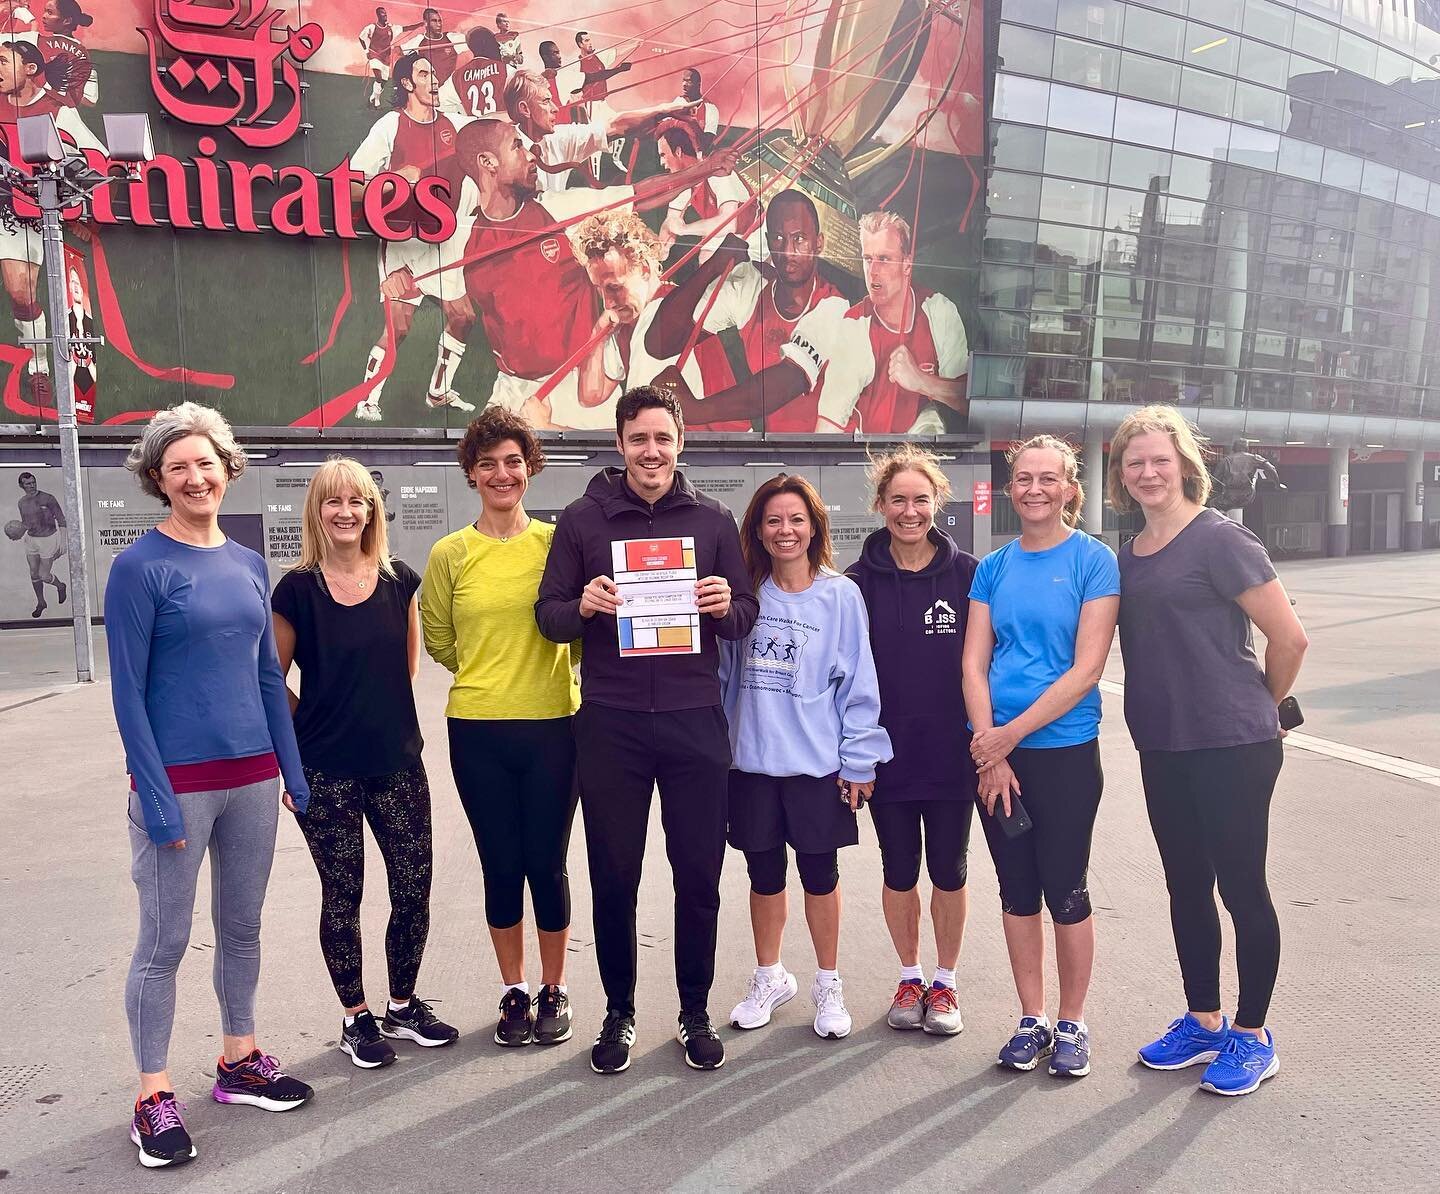 A decade of training with some of the best people I know. How time flys when your having fun! 
.
.
.
.
.
.
.
.
.

#nicksbootcamp #emiratesstadium #highburyfields #islington #outdoorfitness #fitness #exerciseclass #fitnessclass #exercise #bootcamp #pe